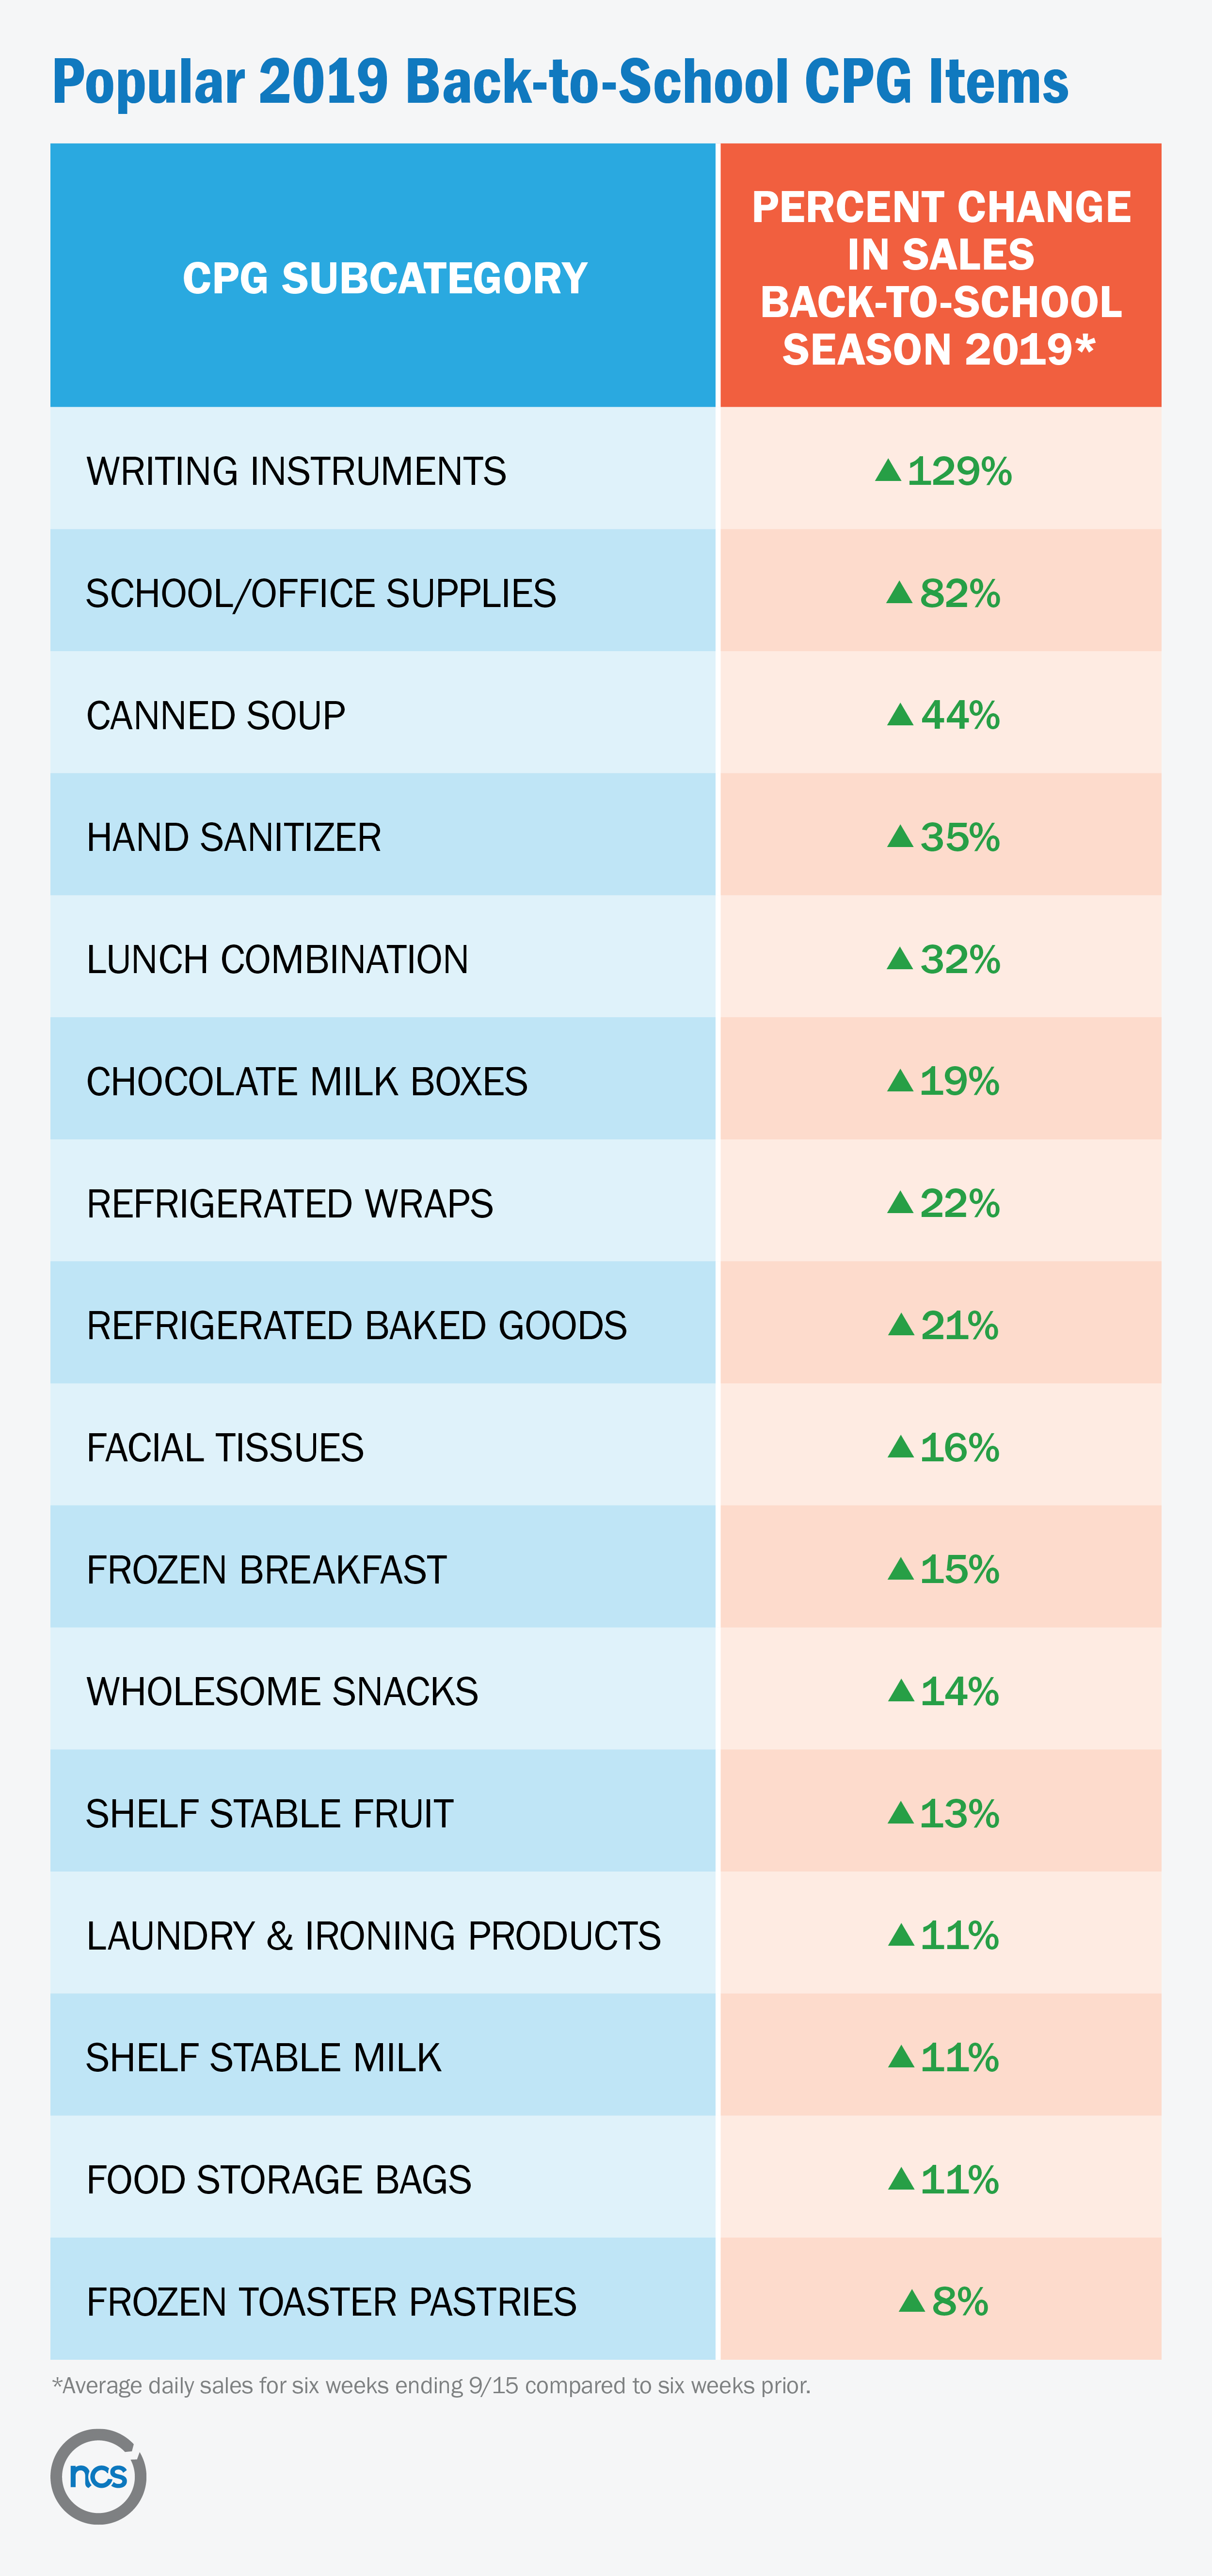 Increased percent change in sales in 2019 for popular back-to-school CPG items. Top five items are writing instruments, school/office supplies, canned soup, hand sanitizer, and lunch combination.